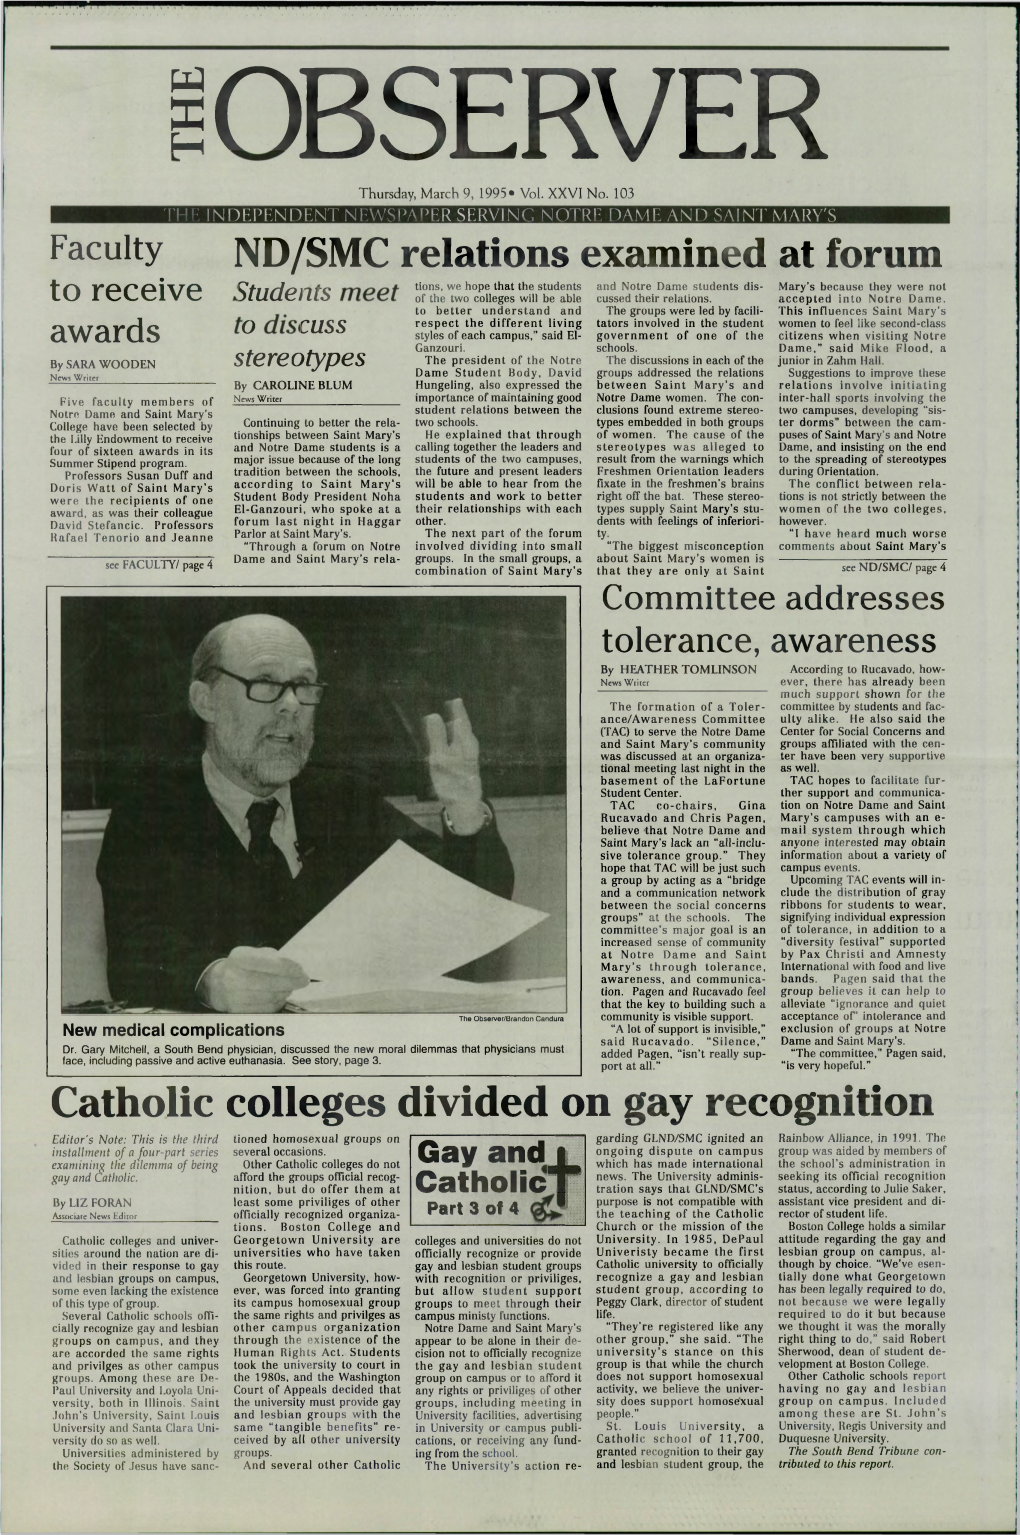 ND/SMC Relations Examined at Forum Catholic Colleges Divided on Gay